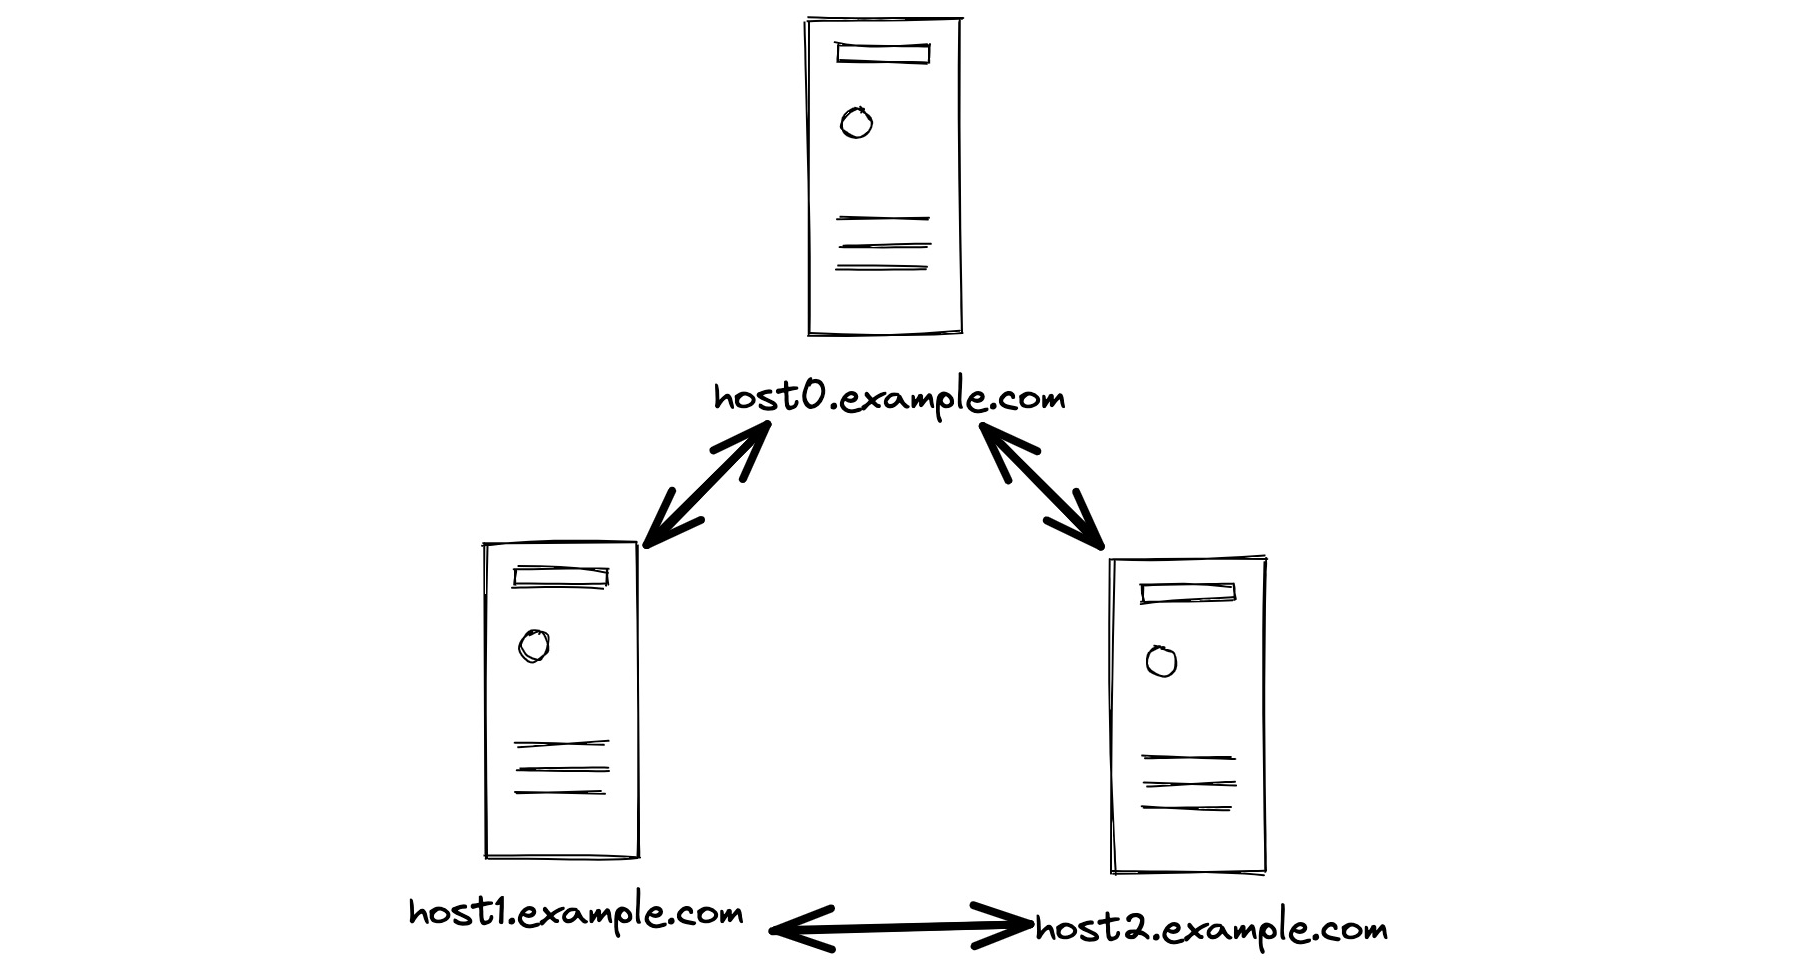 Three servers named host0, host1, and host2, with arrows indicating that they all communicate with each other.